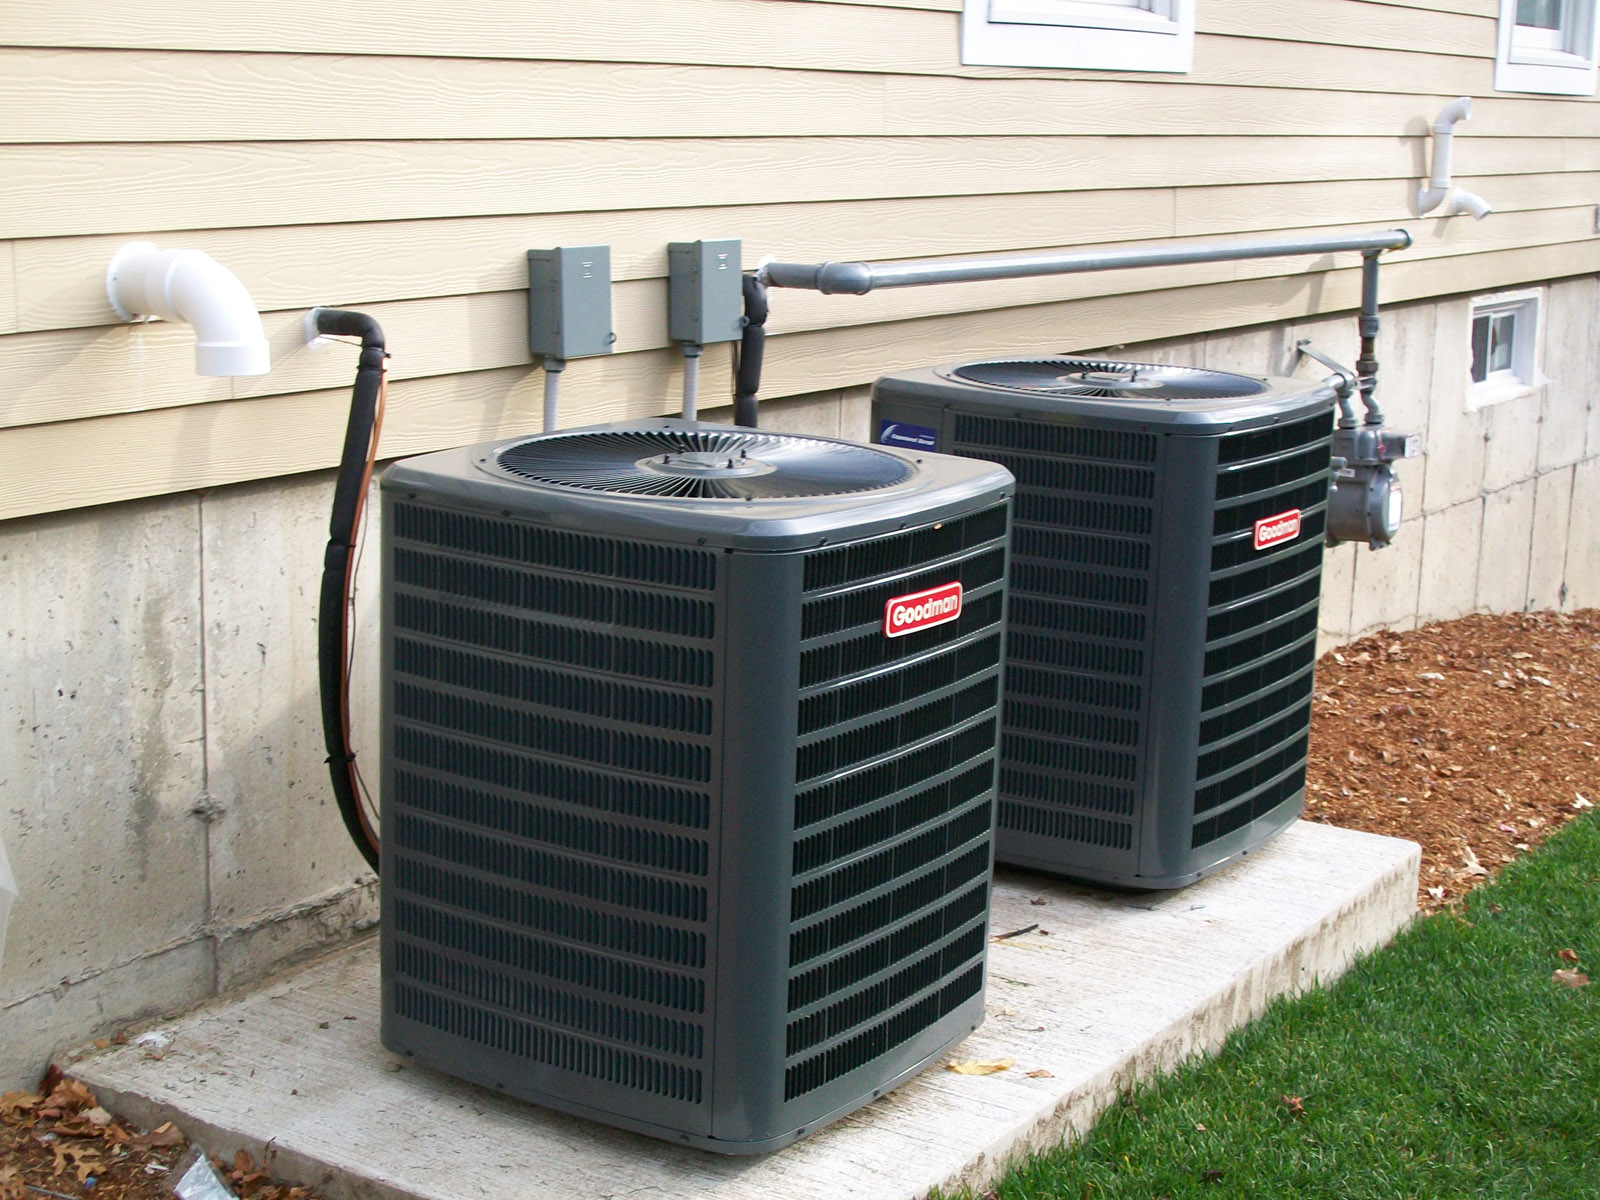 Does size of air conditioner matter?